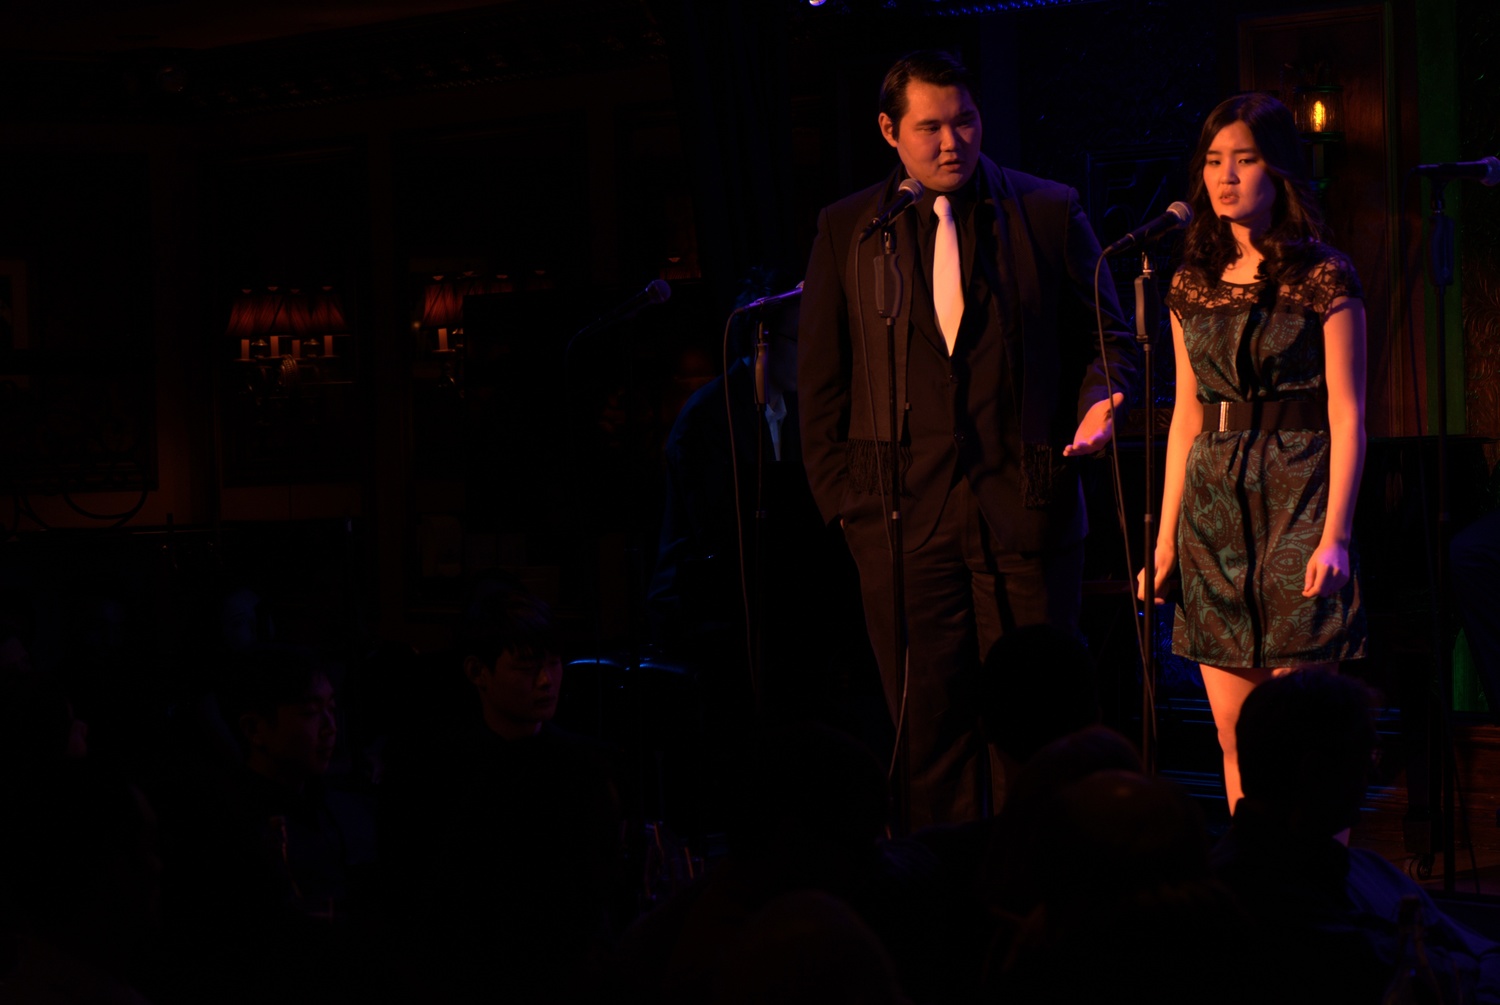 Some of the pictures from 54 Below concert.